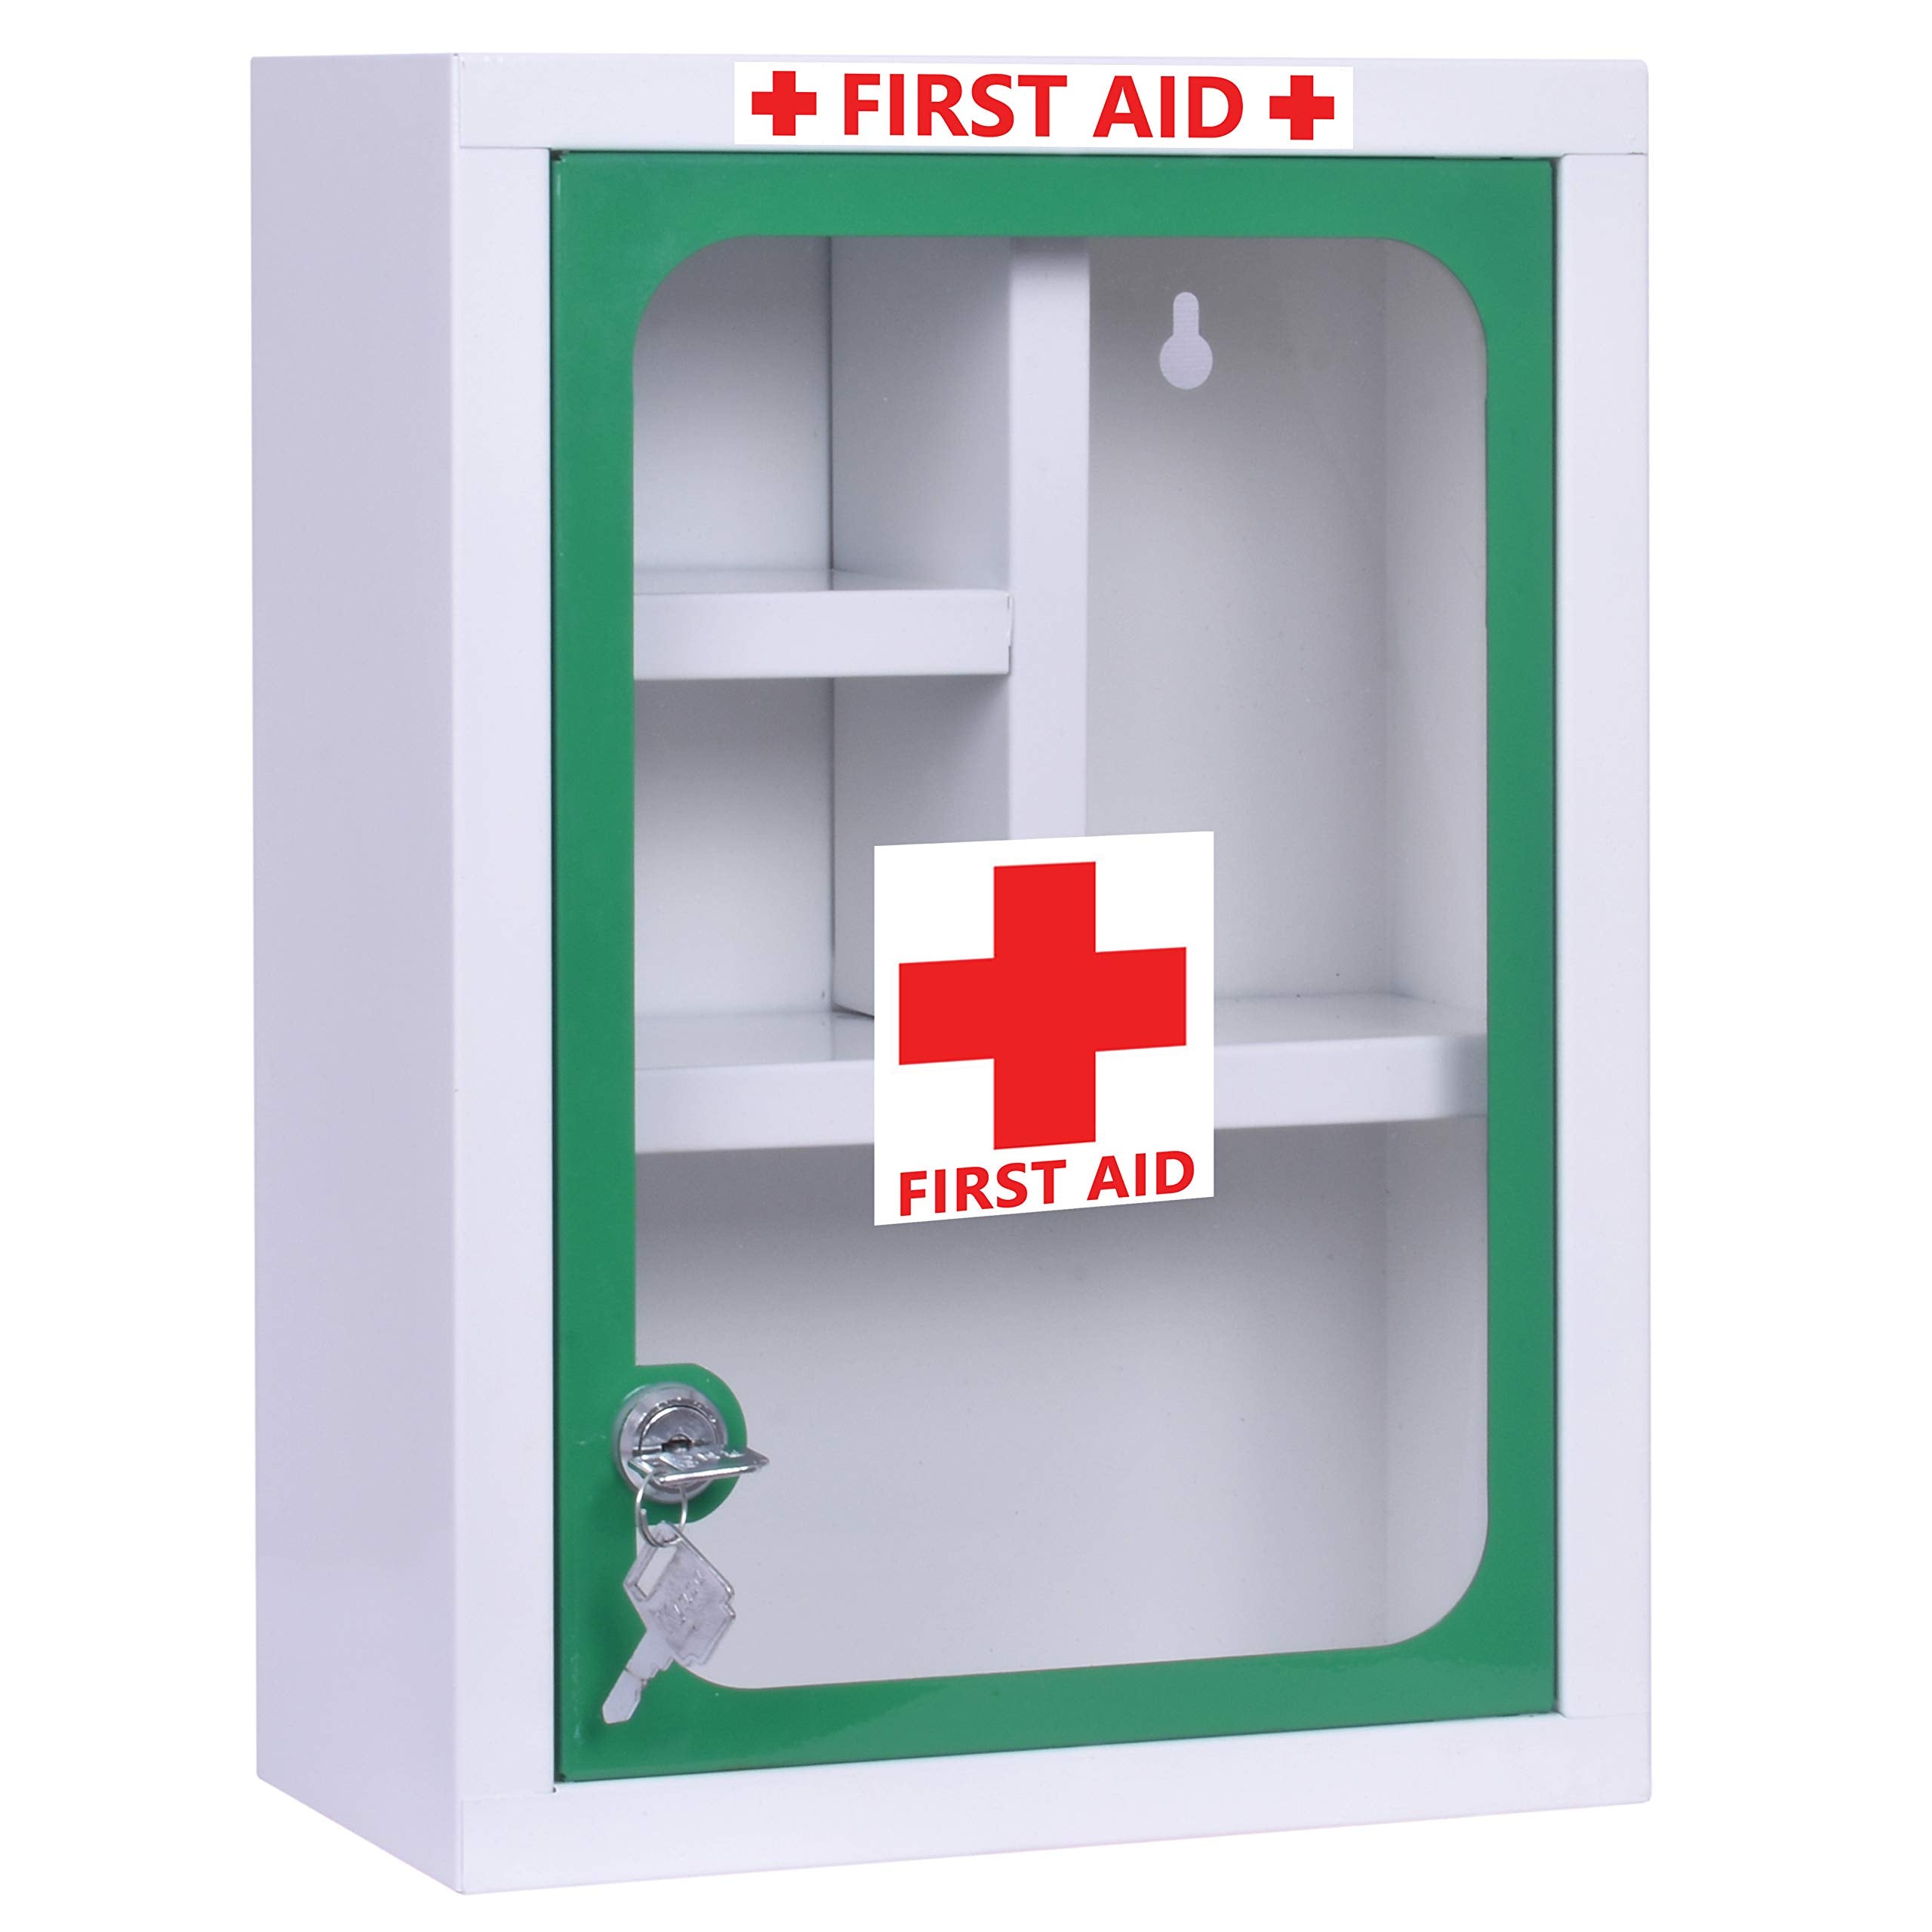 Plantex Big Size Emergency First Aid Kit Box with Multi Compartments for Home/School/Office/Wall (XL, Green and White), Rectangular